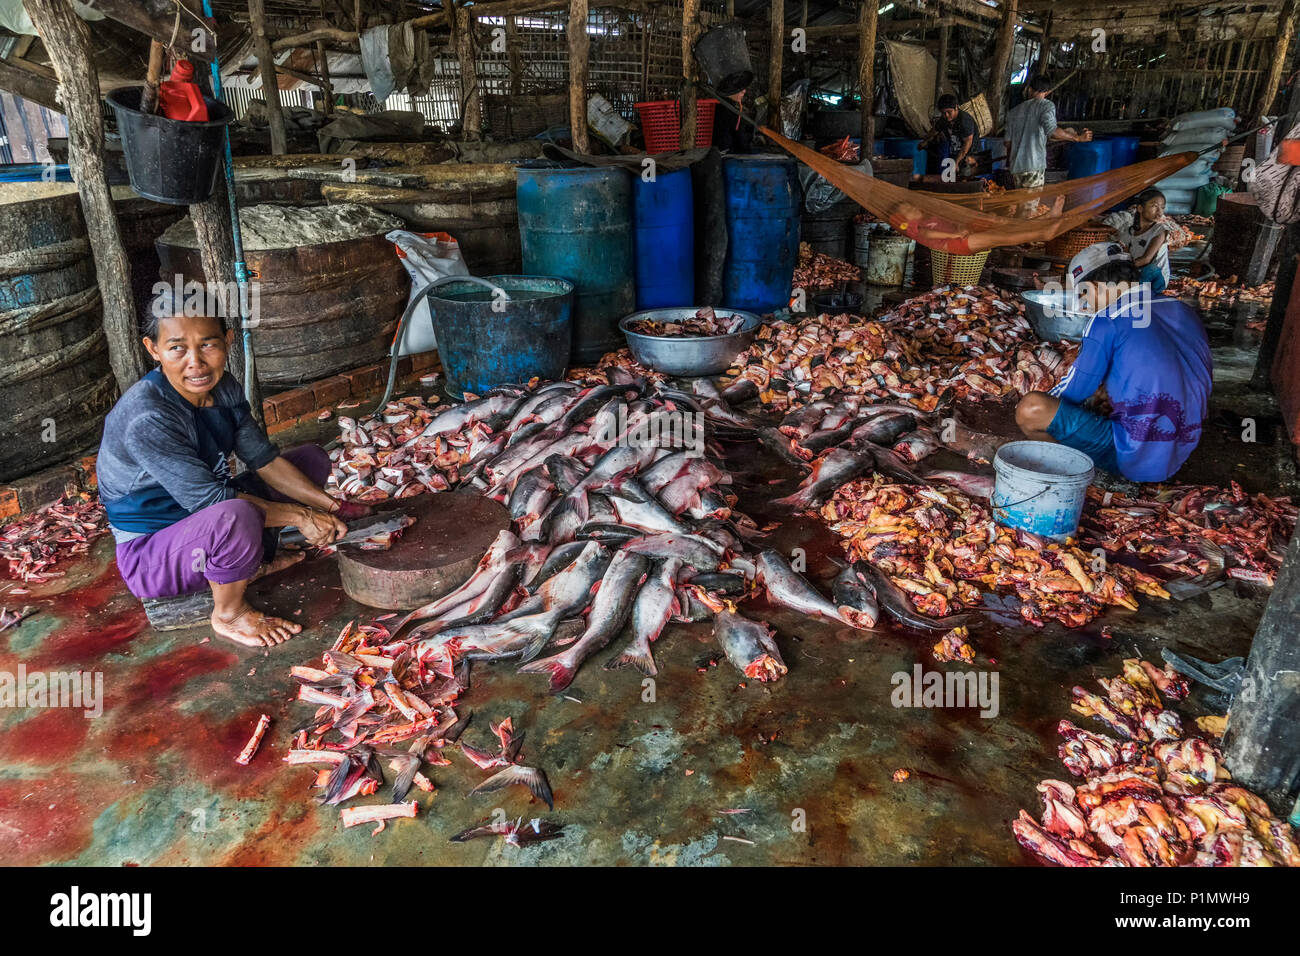 Blood and guts in the Cambodian Fish Market. Stock Photo